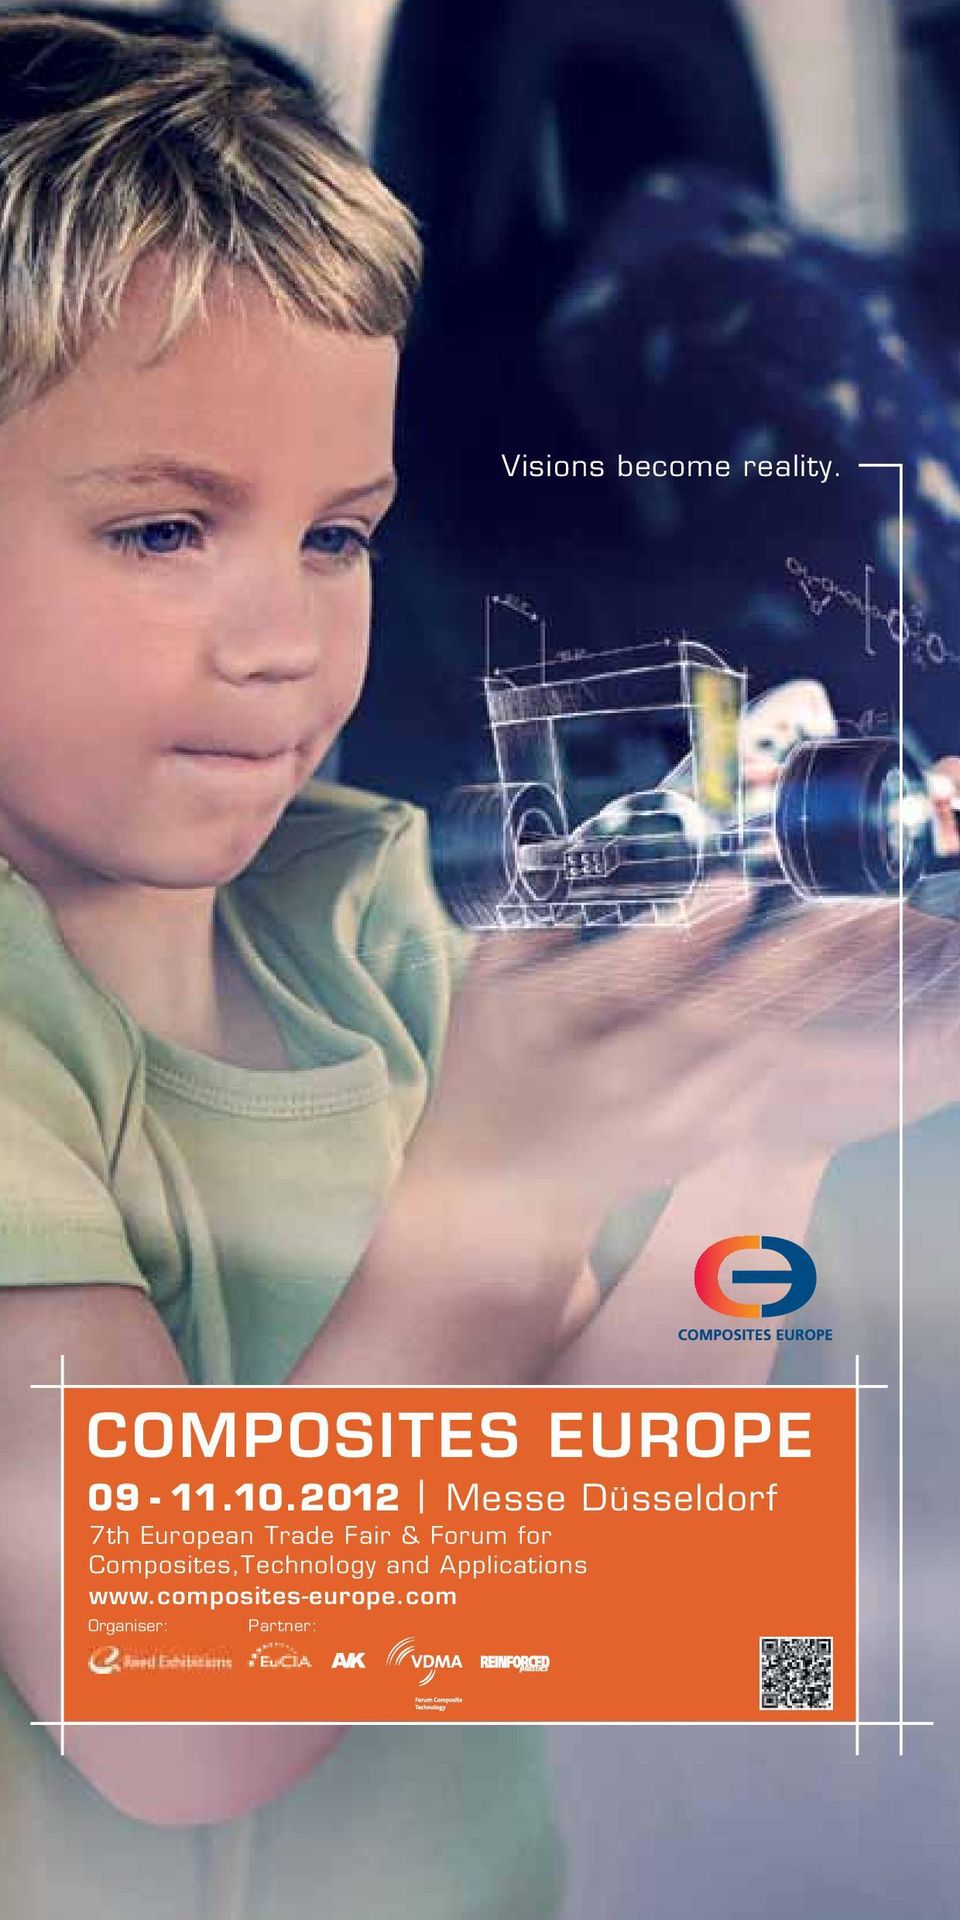 & Forum for Composites,Technology and